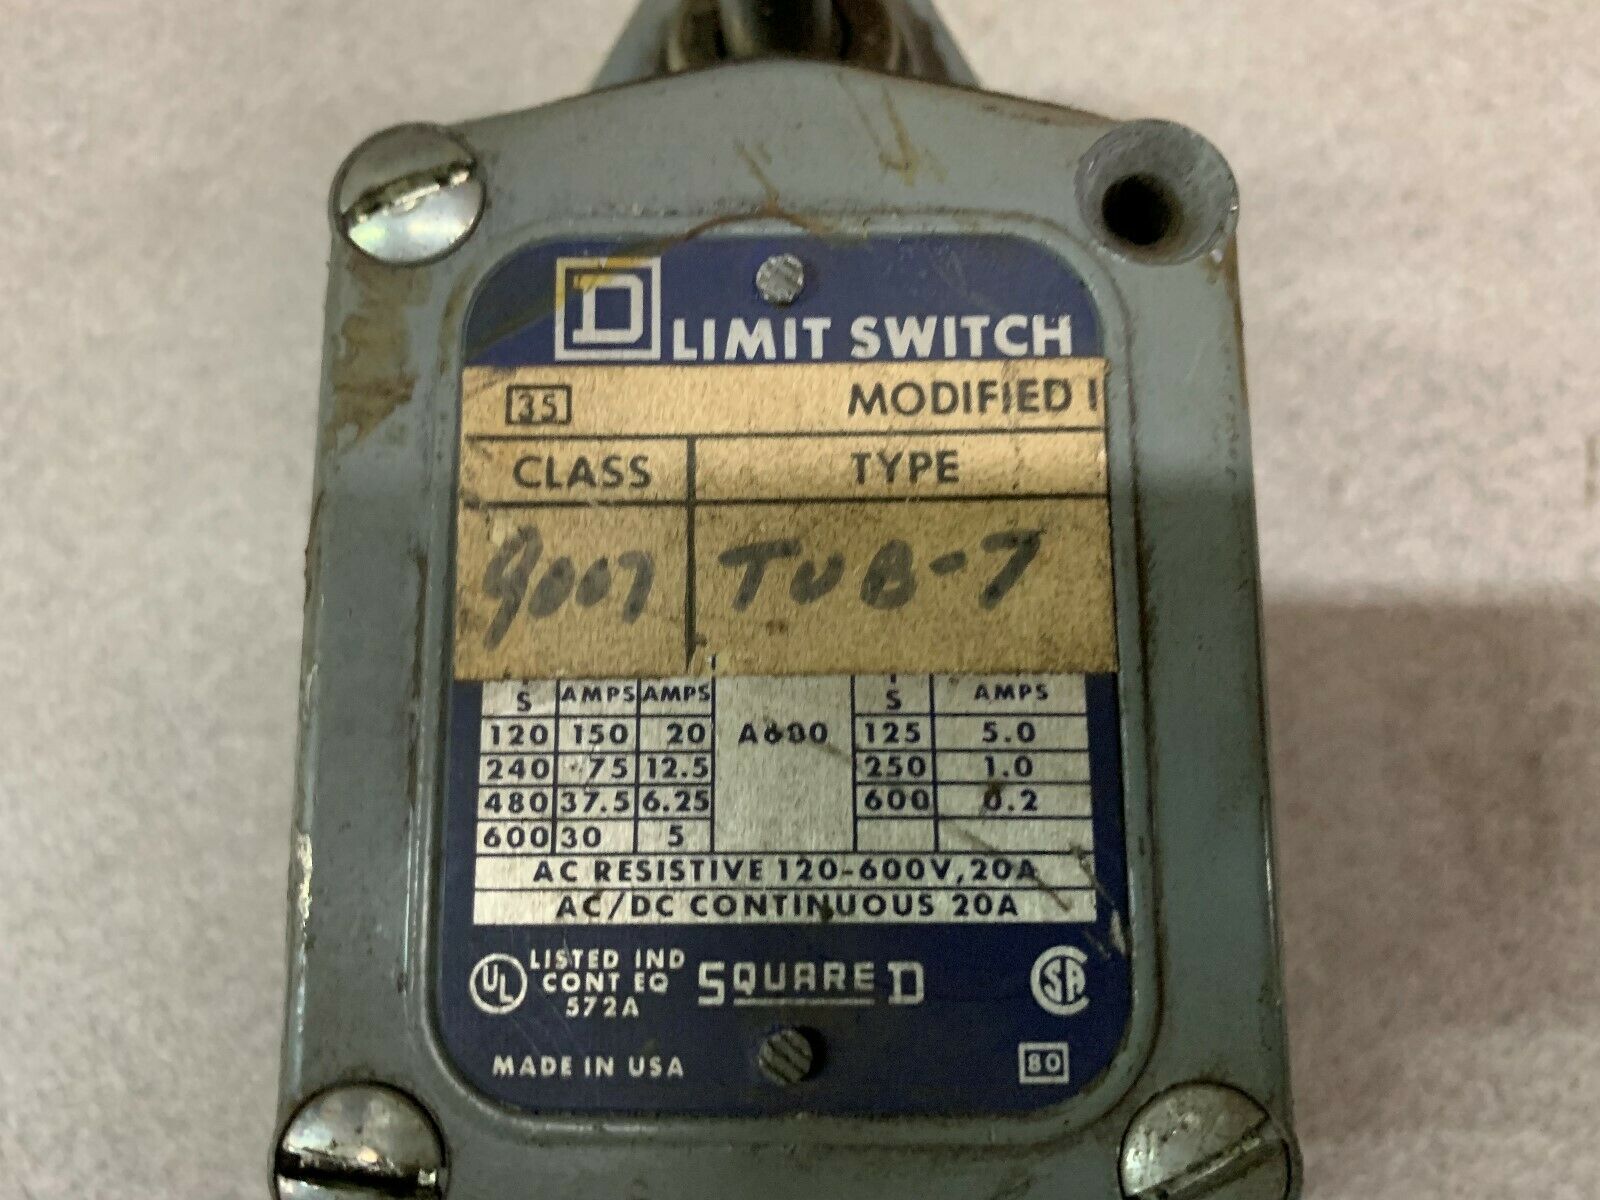 USED SQUARE D LIMIT SWITCH 9007 TUB-7